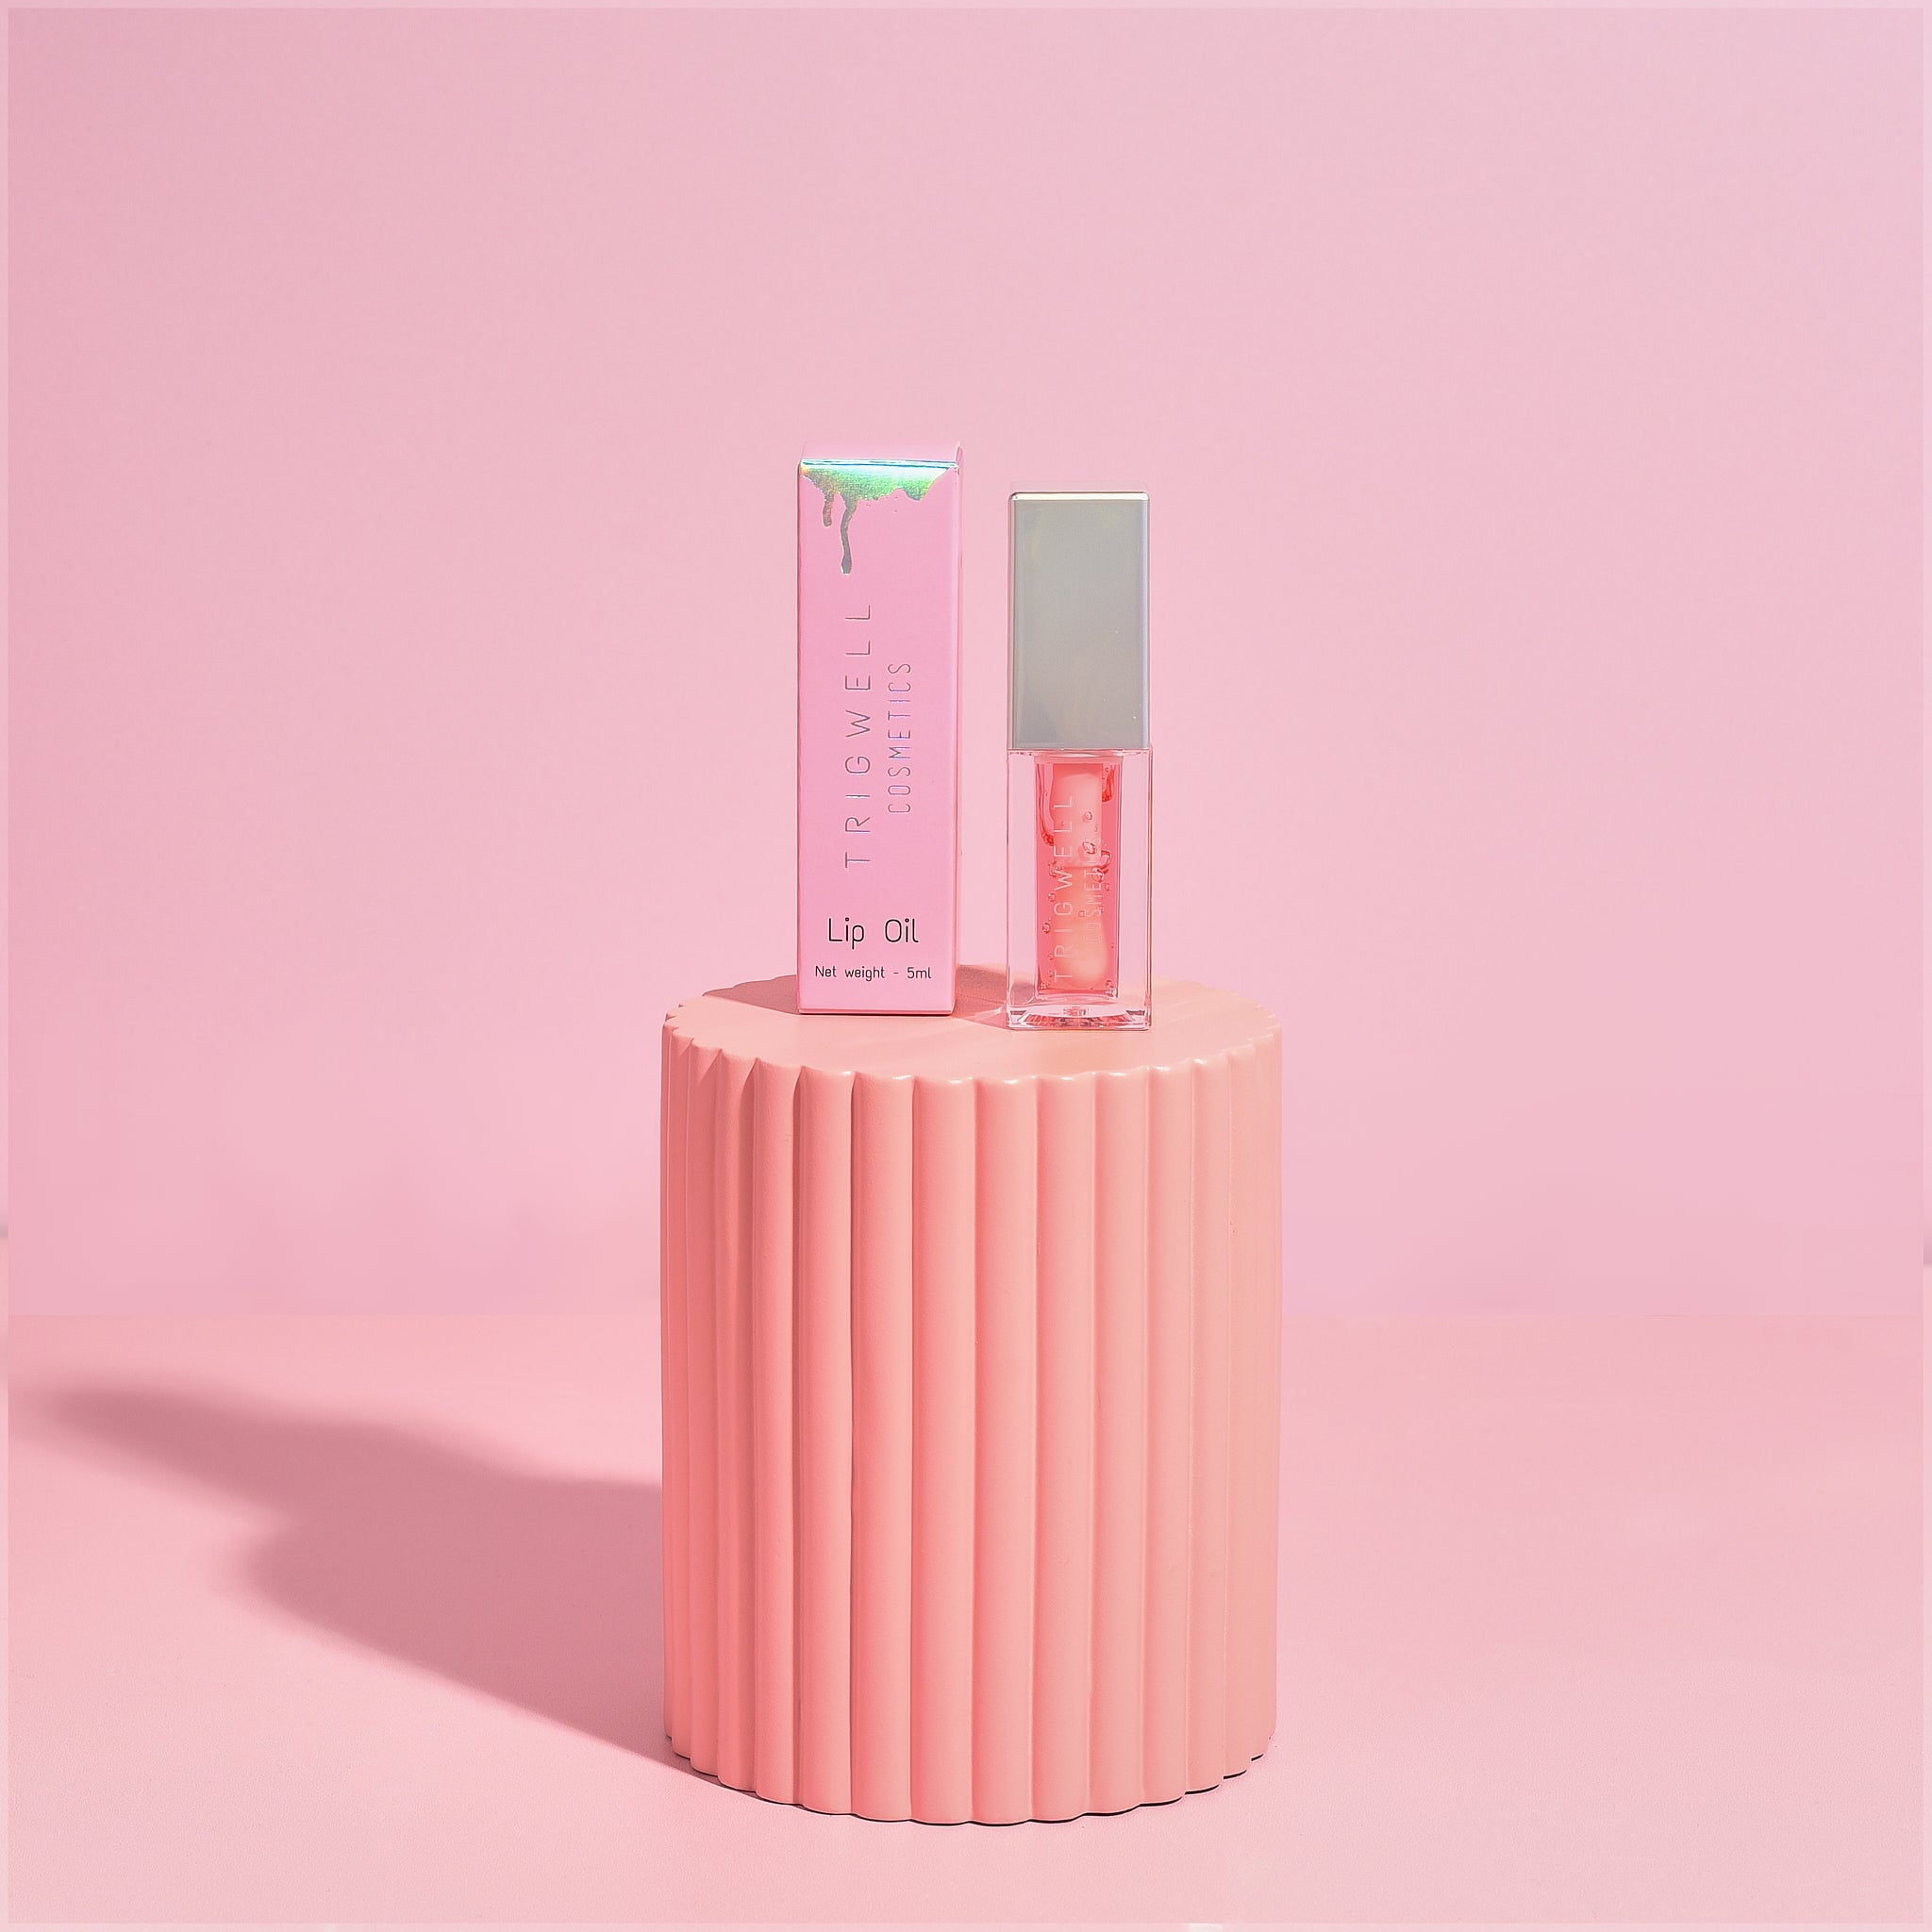 Image of Watermelon hydrating lip oil and its packaging